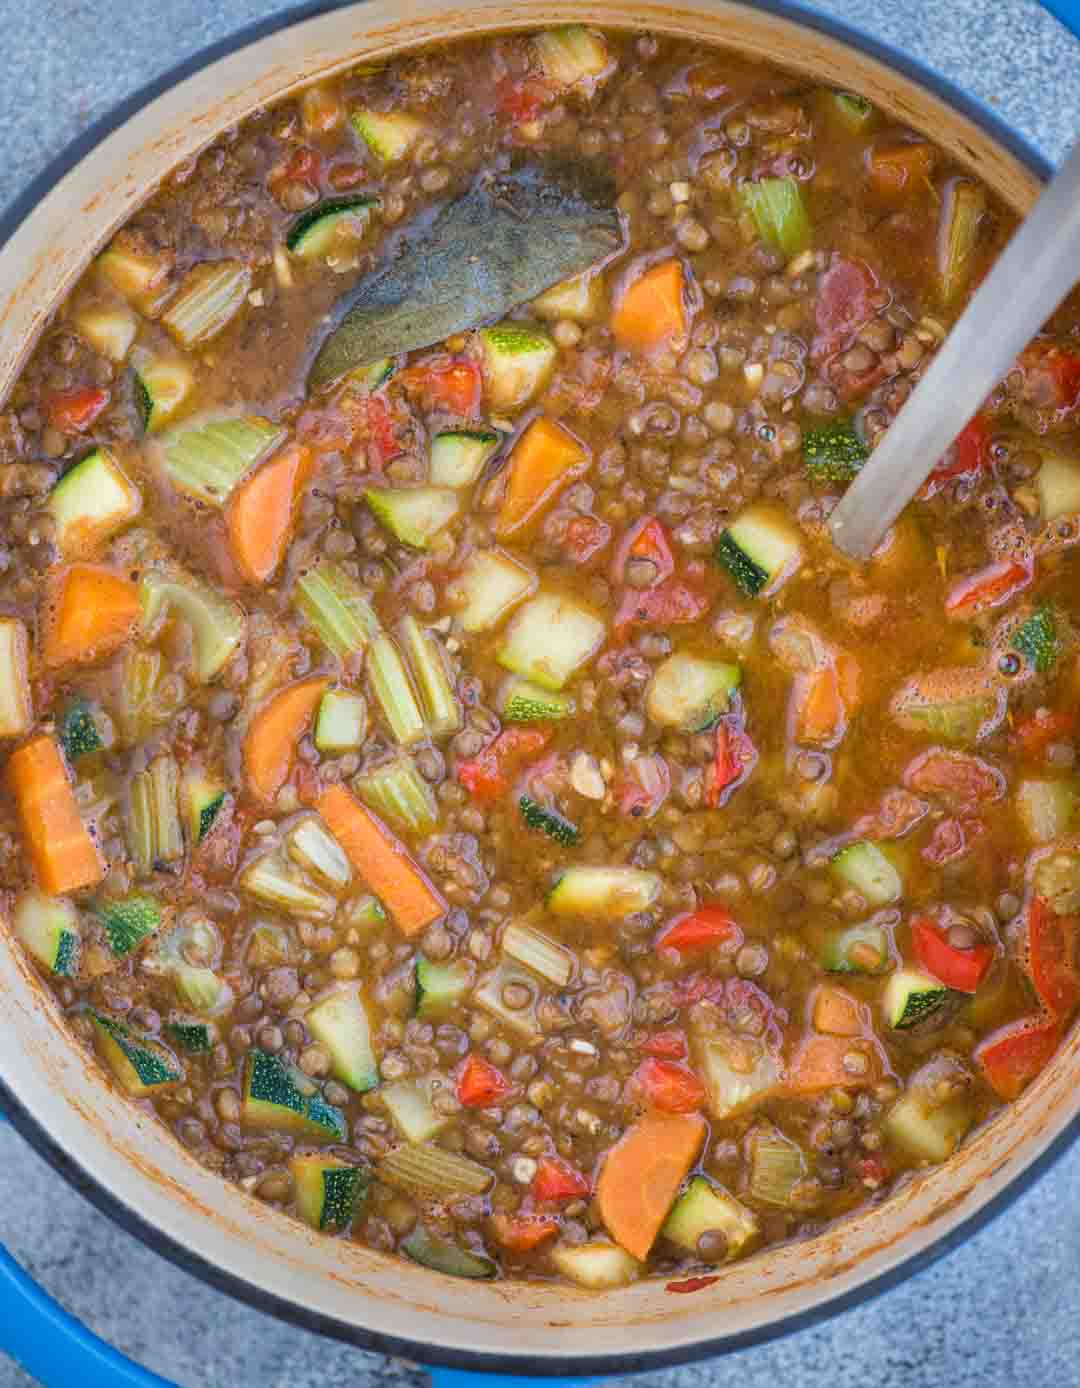 Vegetable Lentil Soup with array load of vegetables is a filling one-pot vegan meal. Made with Lentils, Zucchini, Carrot, Celery, this soup is loaded with plant-based protein and fiber.